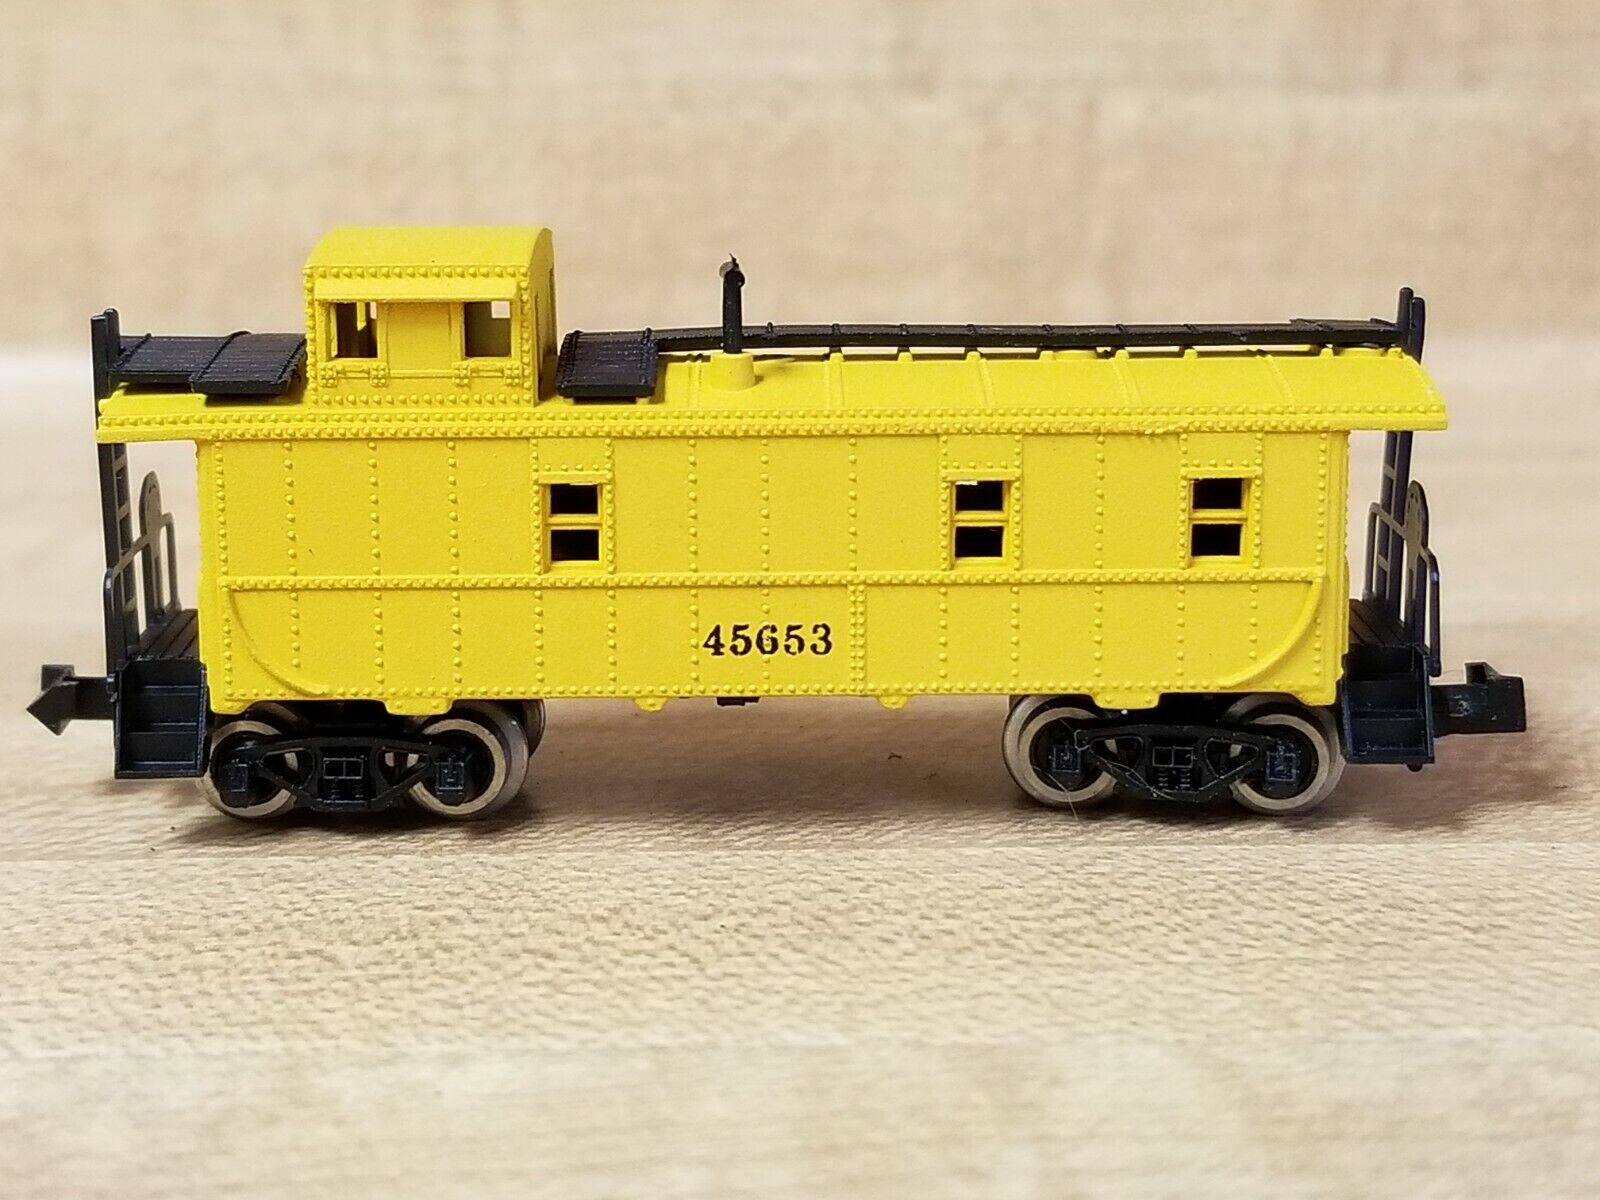 N Scale Atlas 2274 Undecorated Transfer Caboose 1885 N769 for sale online